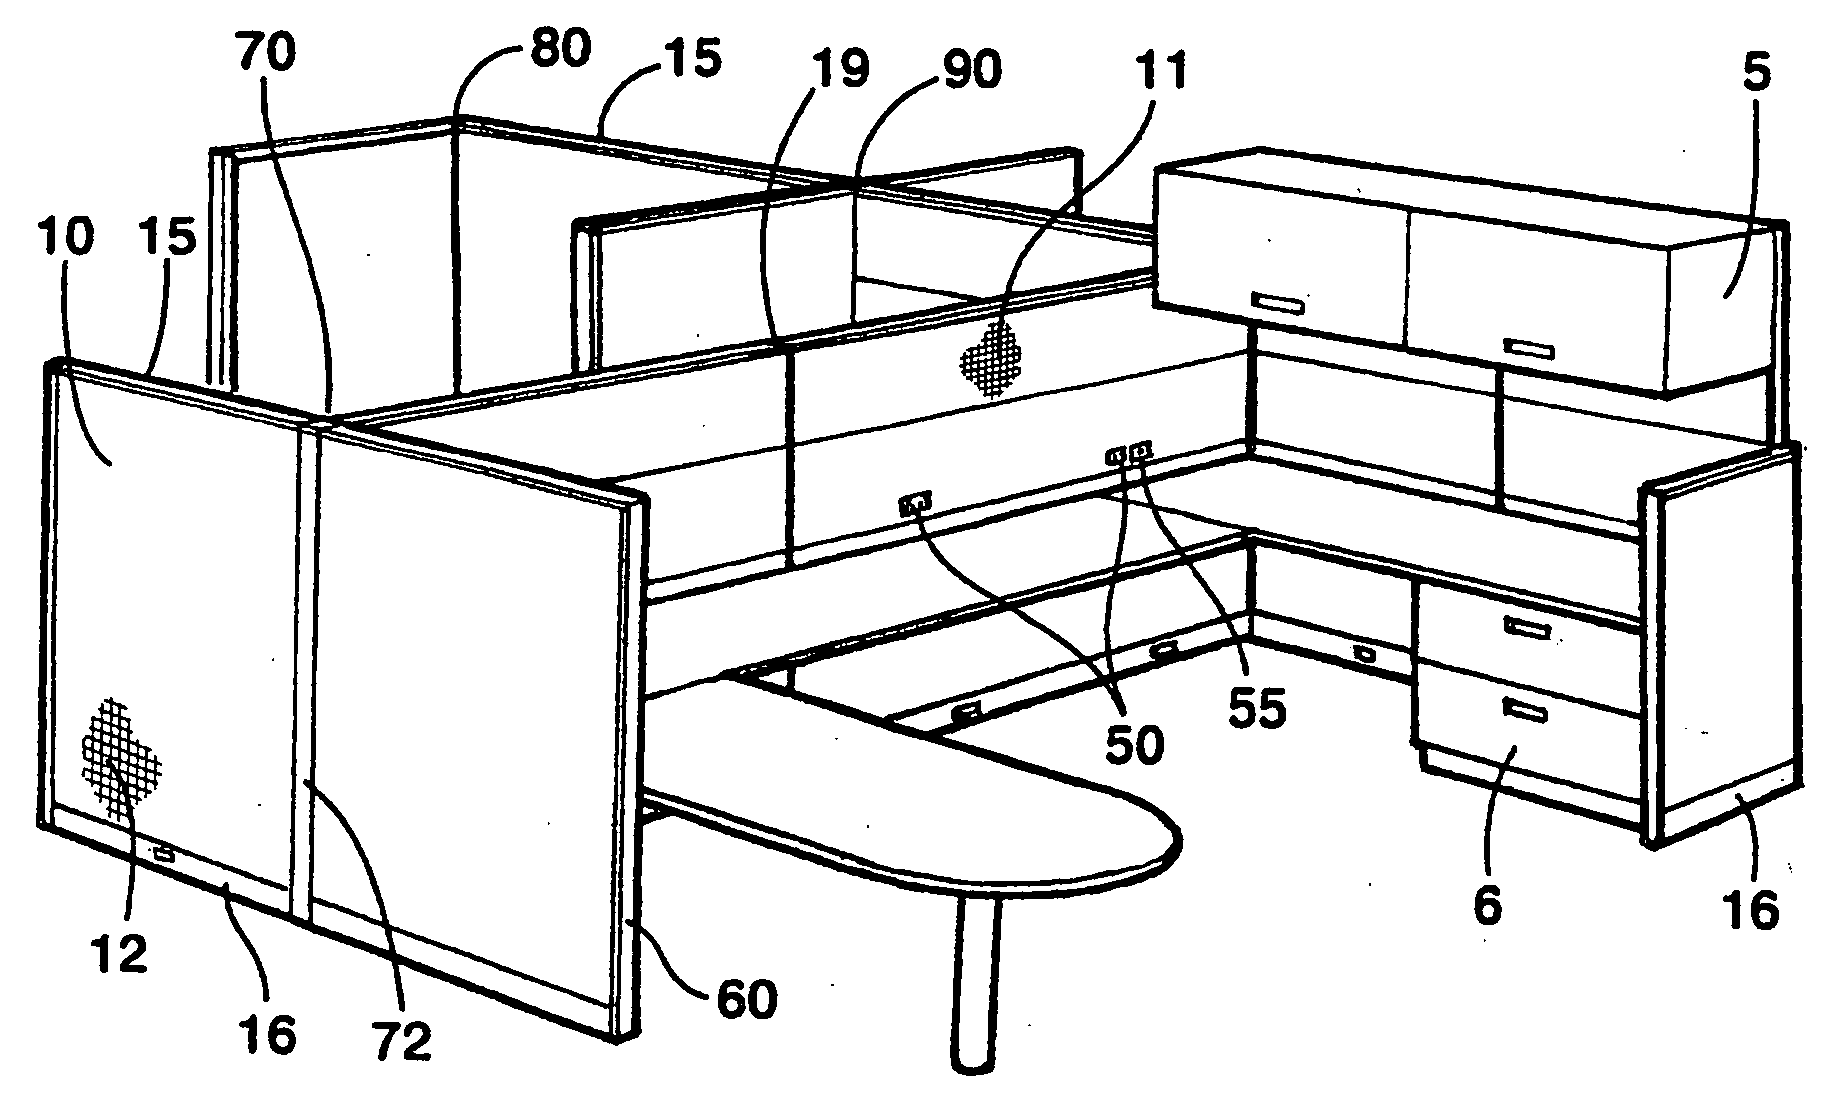 Knock-down portable partition system